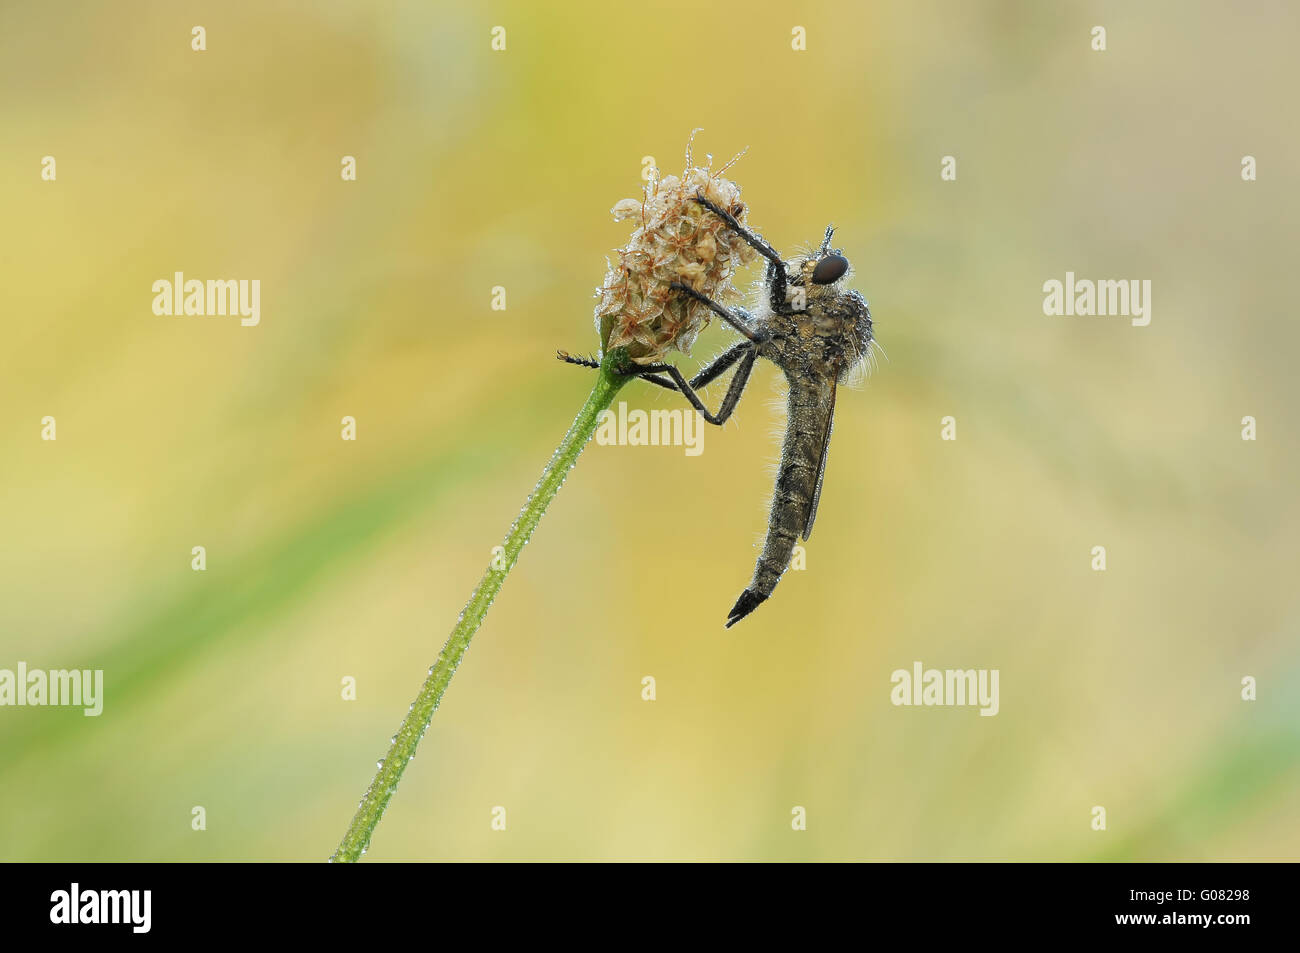 Robber fly Banque D'Images